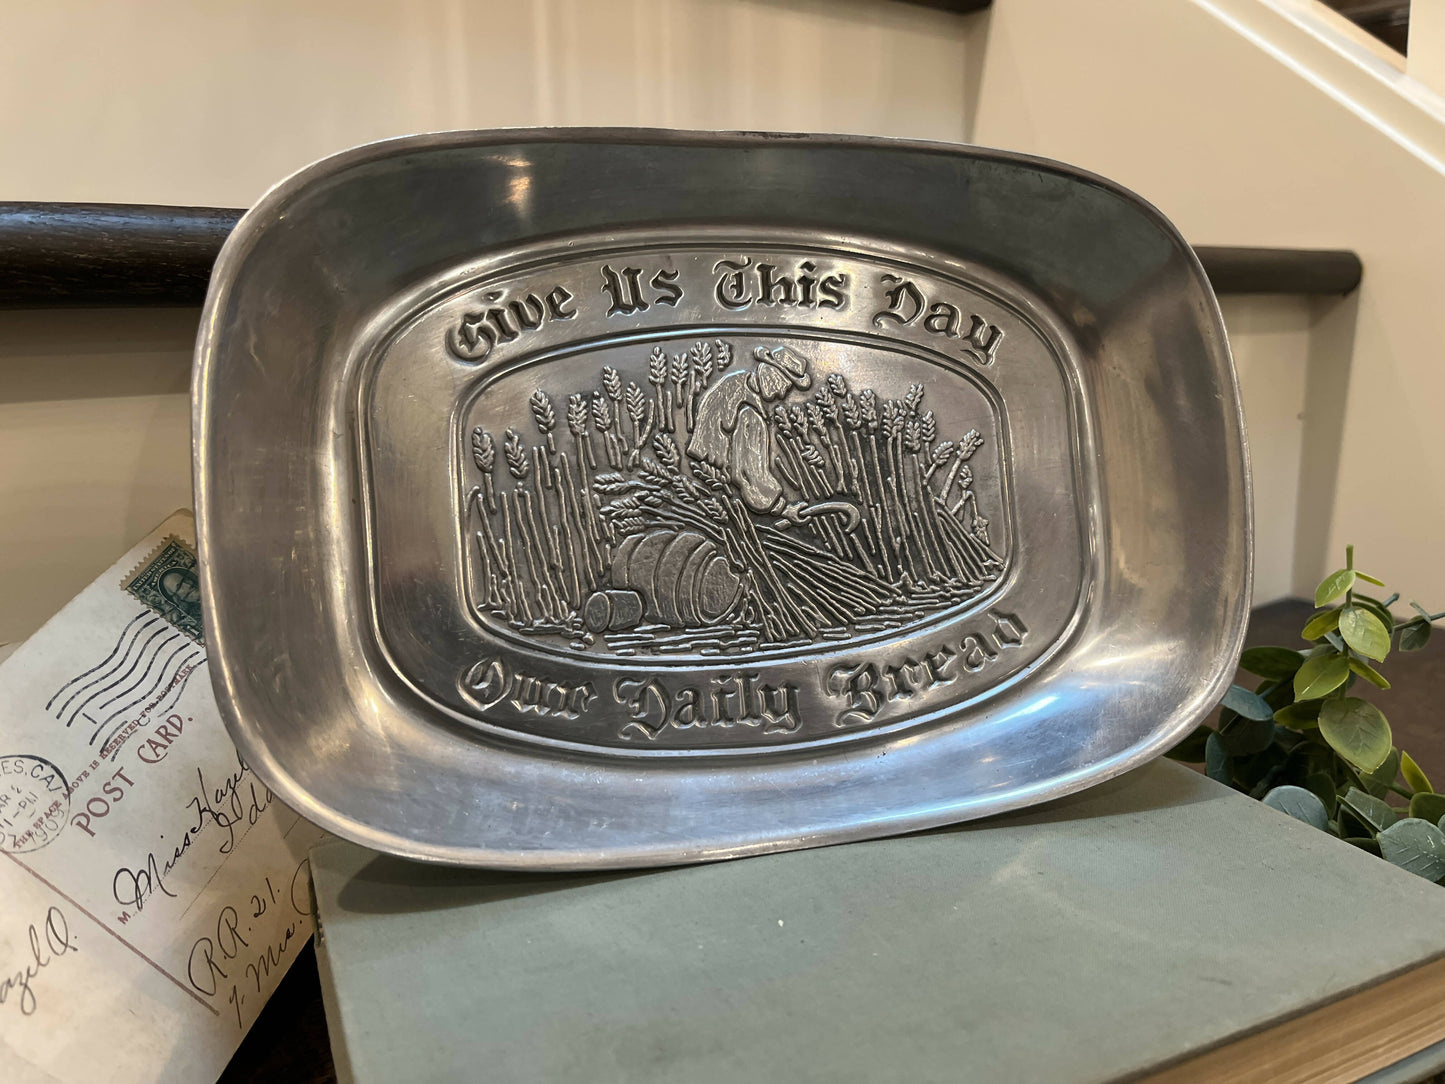 Duratale by Leonard “Daily Bread” Pewter Tray